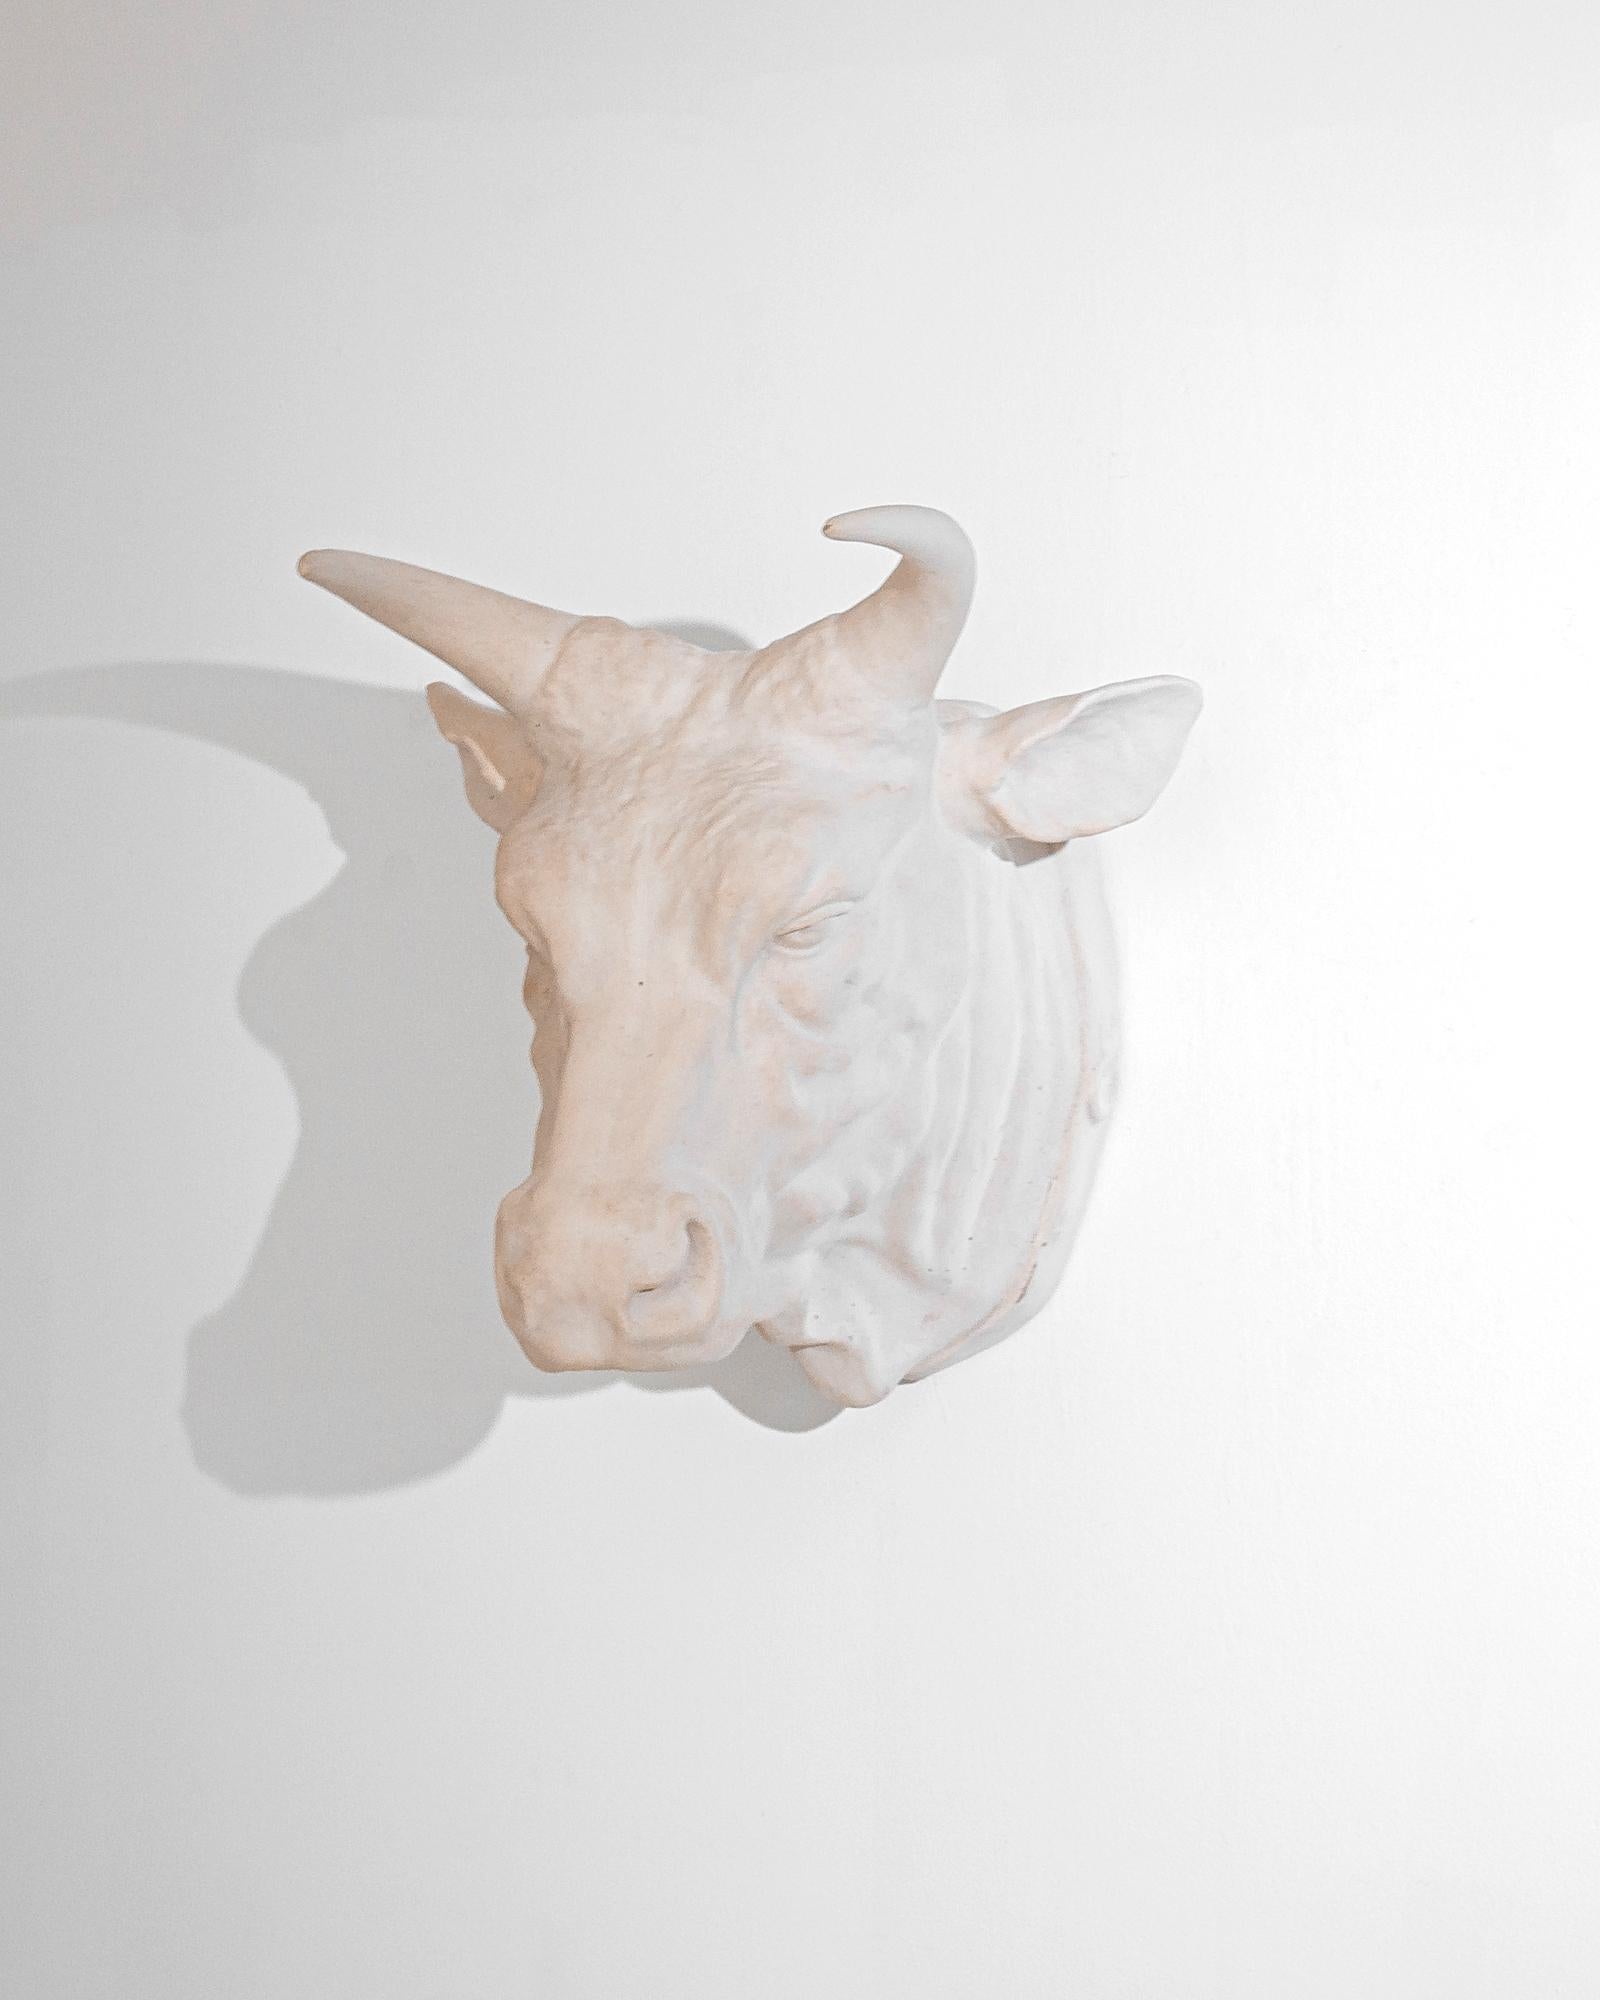 A plaster sculpture of a bull’s head from Poland, made to be mounted on a wall. White plaster is flushed with a tinge of pink; the fine detail of the molding gives a sense of realistic nuance. The bull’s expression is placid, creating an impression